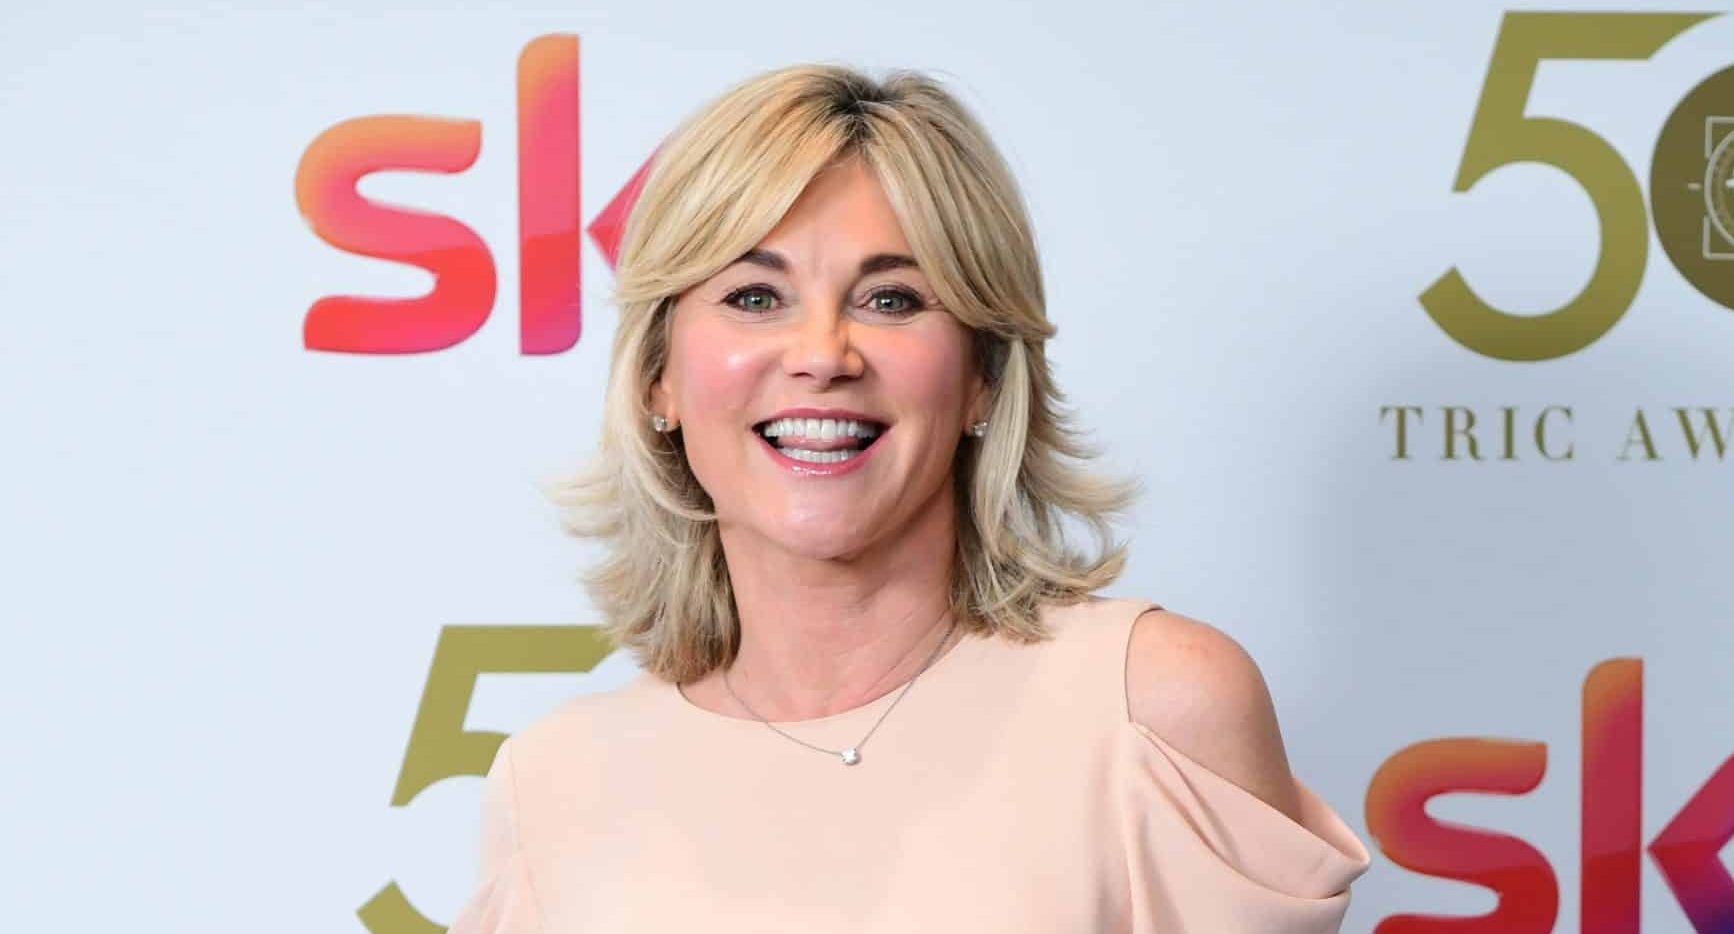 Covid: Anthea Turner slammed for fat-shaming and ableism after Twitter tirade